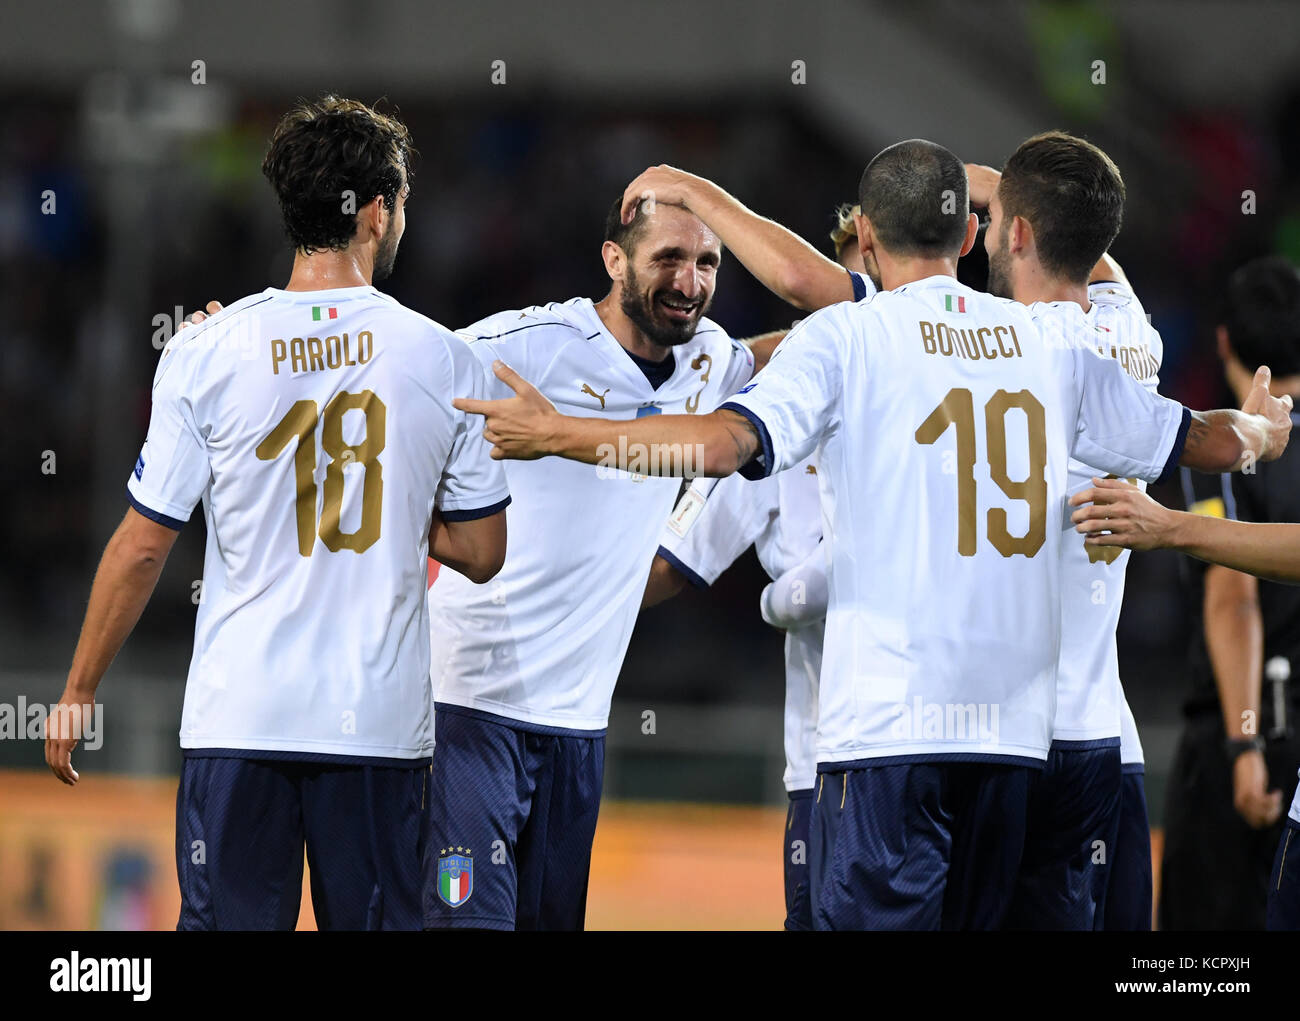 Turin, Italy. 6th Oct, 2017. Giorgio Chiellini (2nd L) of Italy celebrates with teammates after scoring during the FIFA 2018 World Cup Qualifier match between Italy and Macedonia in Turin, Italy, on Oct. 6, 2017. The game ended with a 1-1 draw. Credit: Alberto Lingria/Xinhua/Alamy Live News Stock Photo